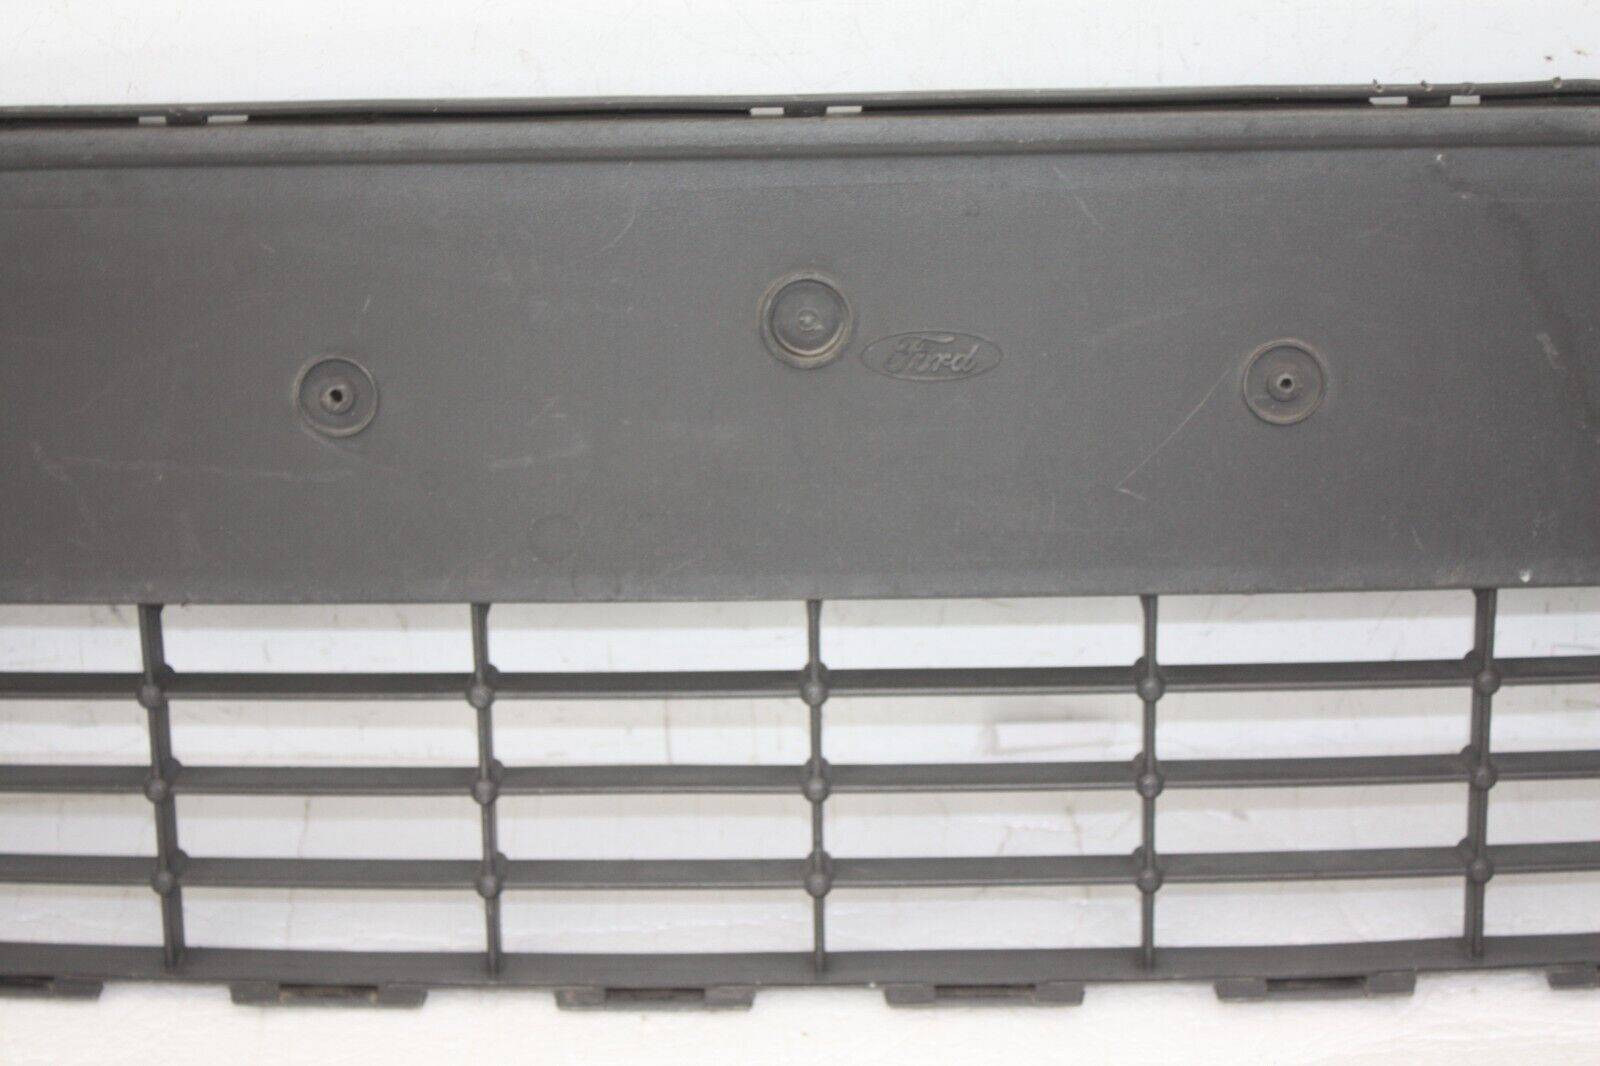 Ford-Focus-Front-Bumper-Grill-2008-TO-2011-8M51-17B968-BE-Genuine-DAMAGED-176410989719-3